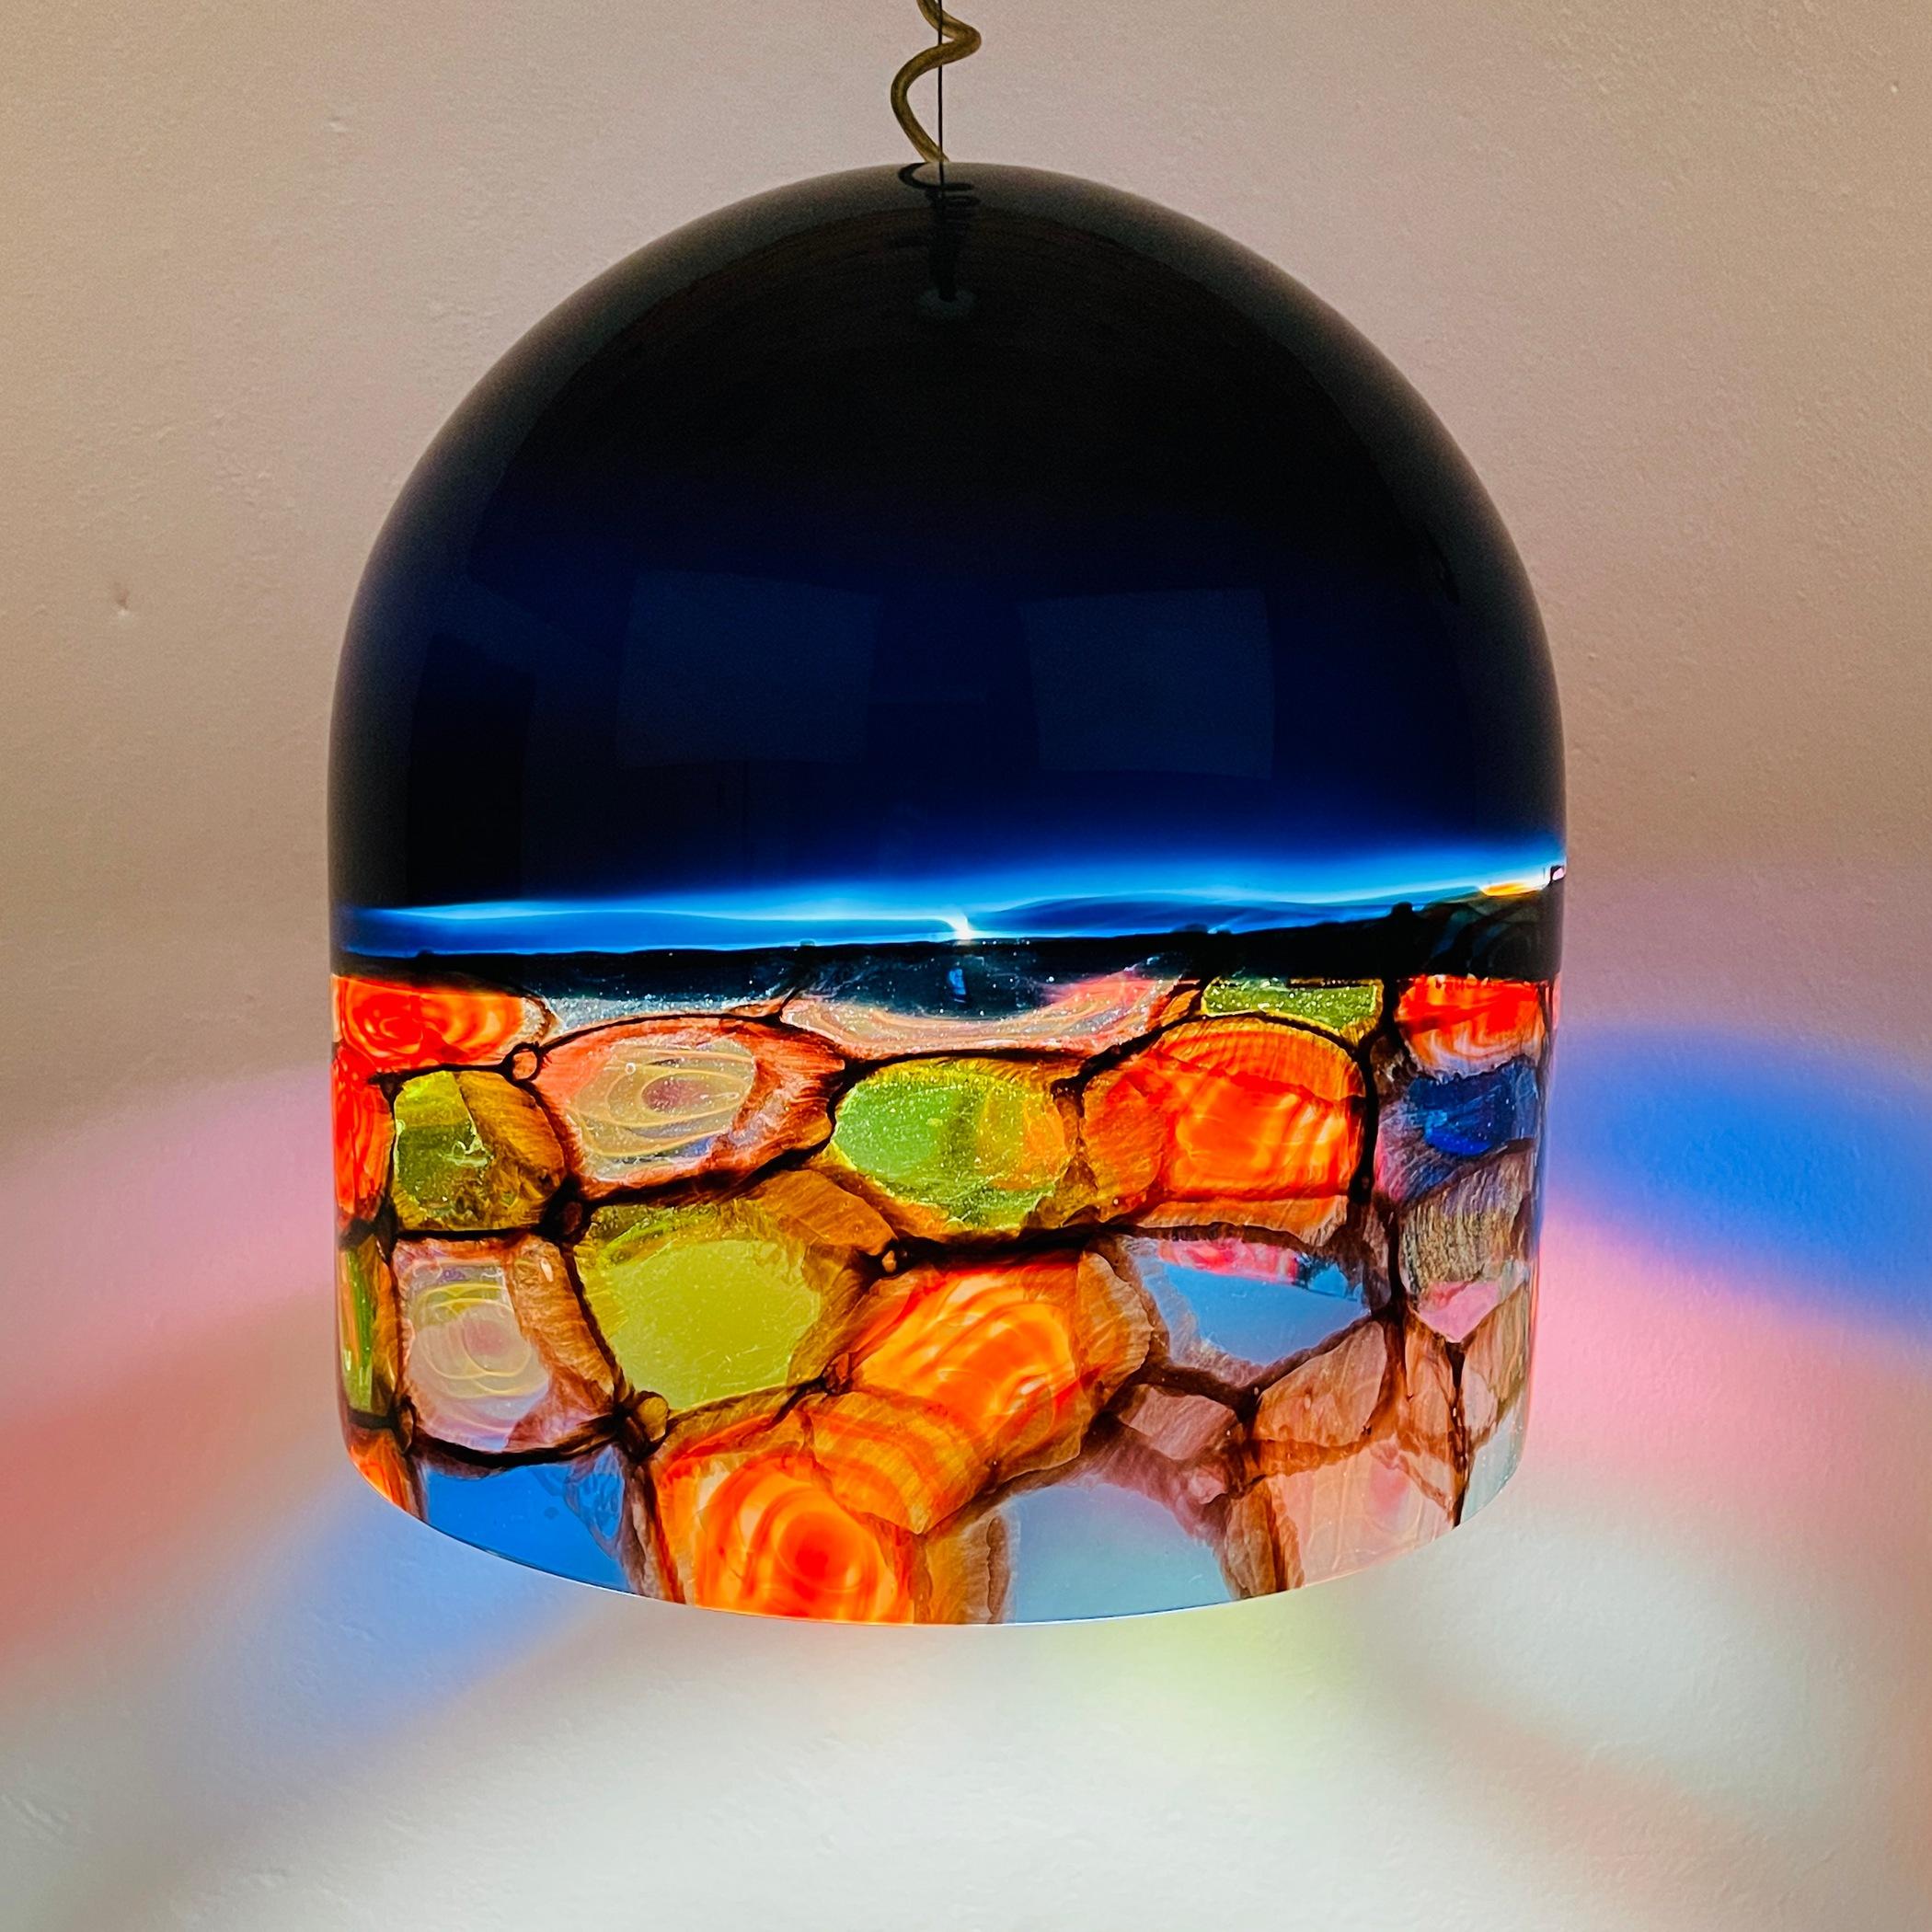 Renato Toso and Noti Massari's original vintage Tinta pendant light is made of Murano glass in Italy. Hand blown glass with multicolor murrine. Leucos' original label. 1971. Cable length is adjustable. Very good vintage condition. No chips or